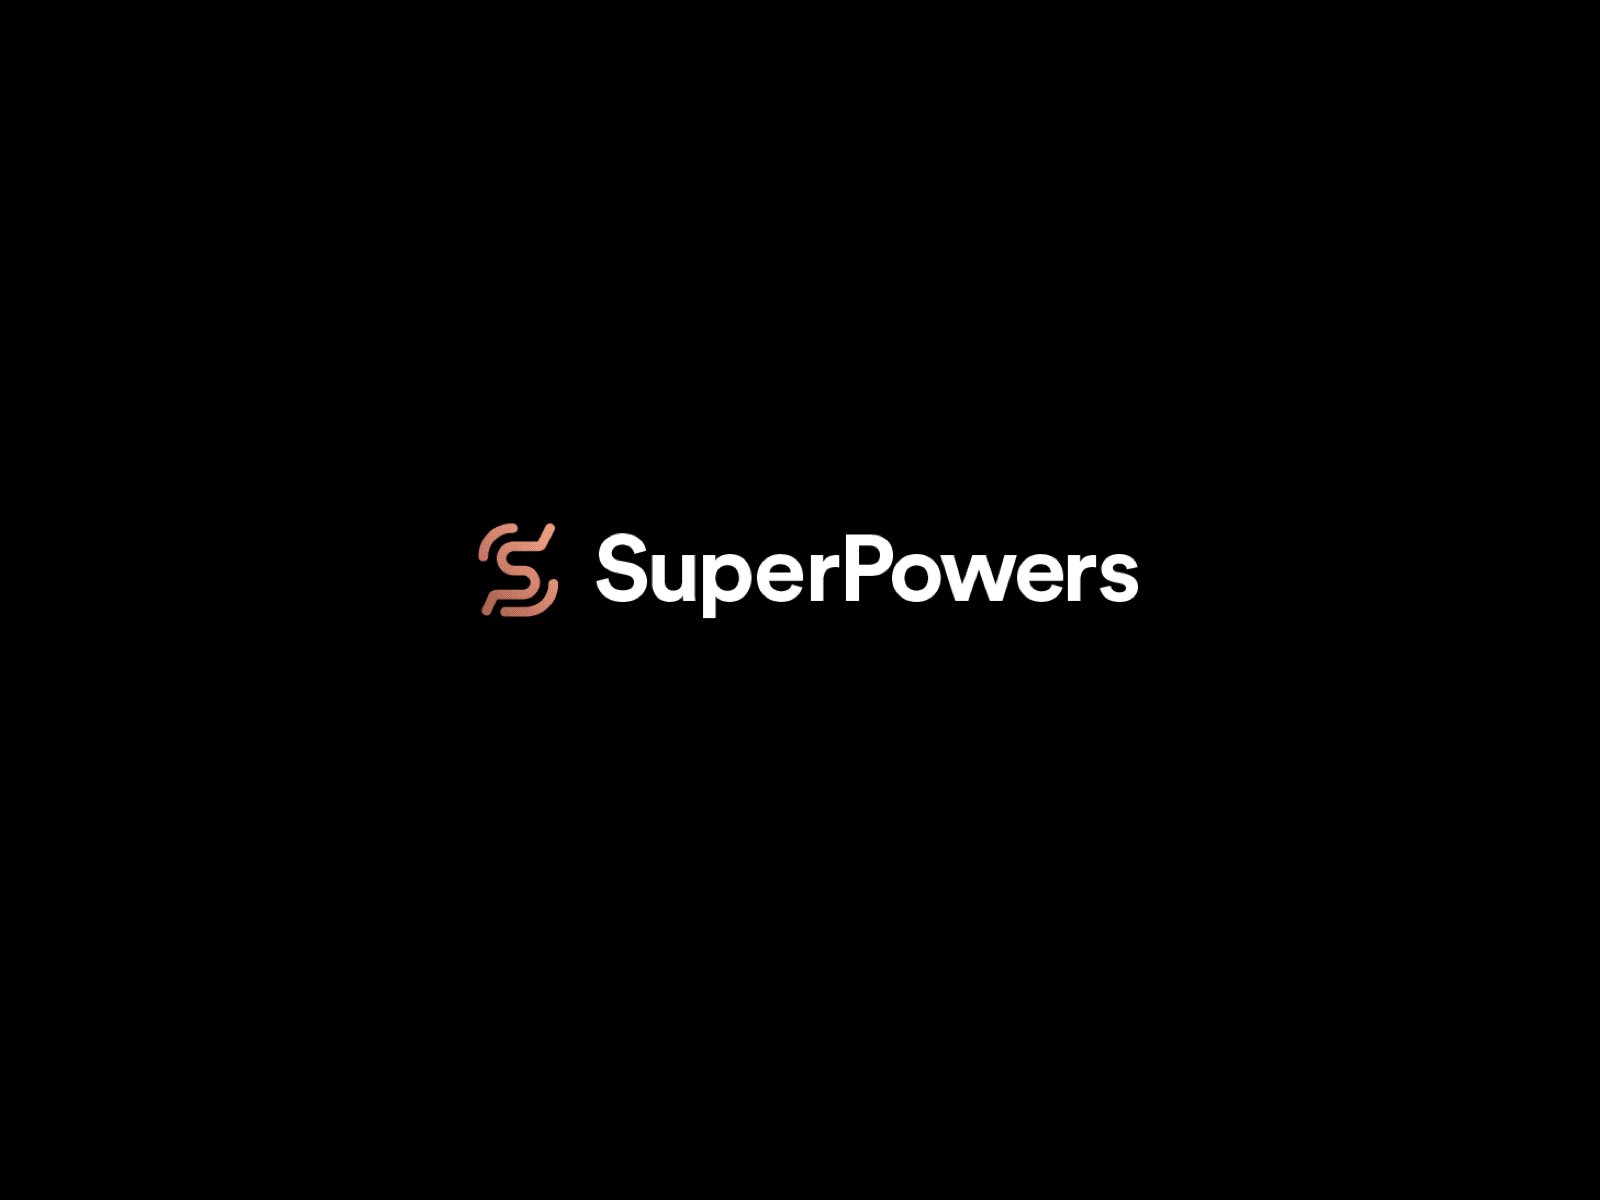 SuperPowers